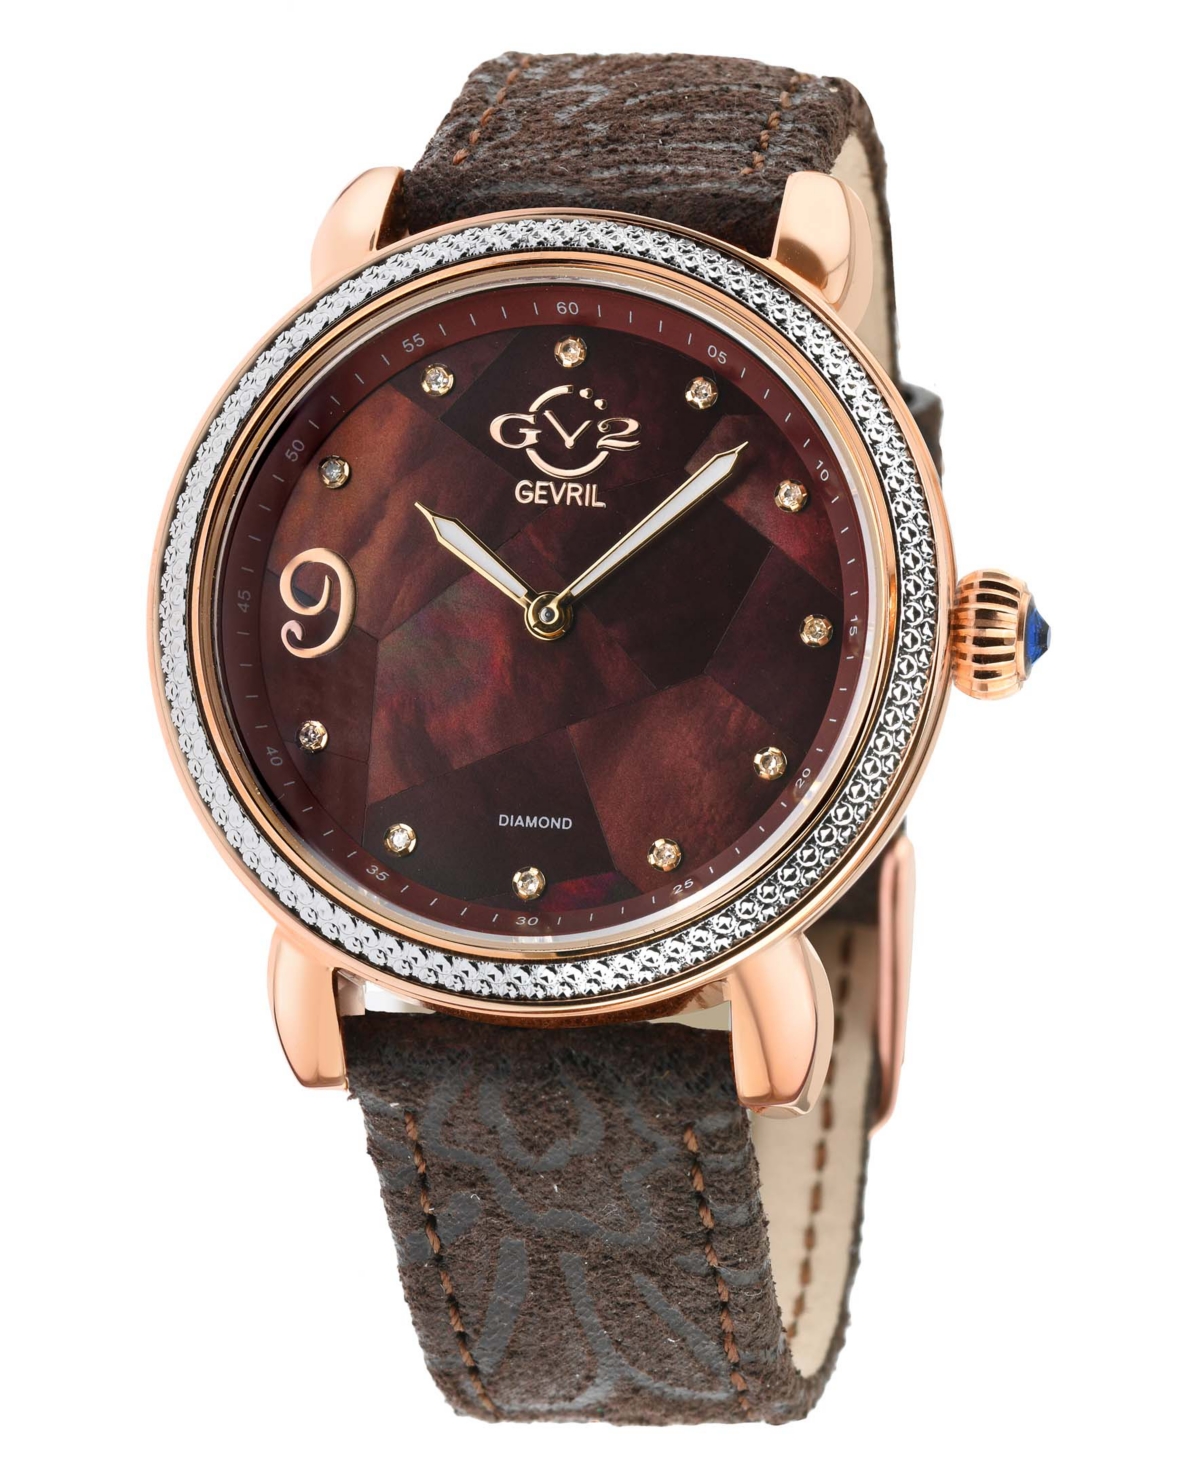 Gv2 By Gevril Women's Ravenna Swiss Quartz Floral Brown Leather Watch 37mm